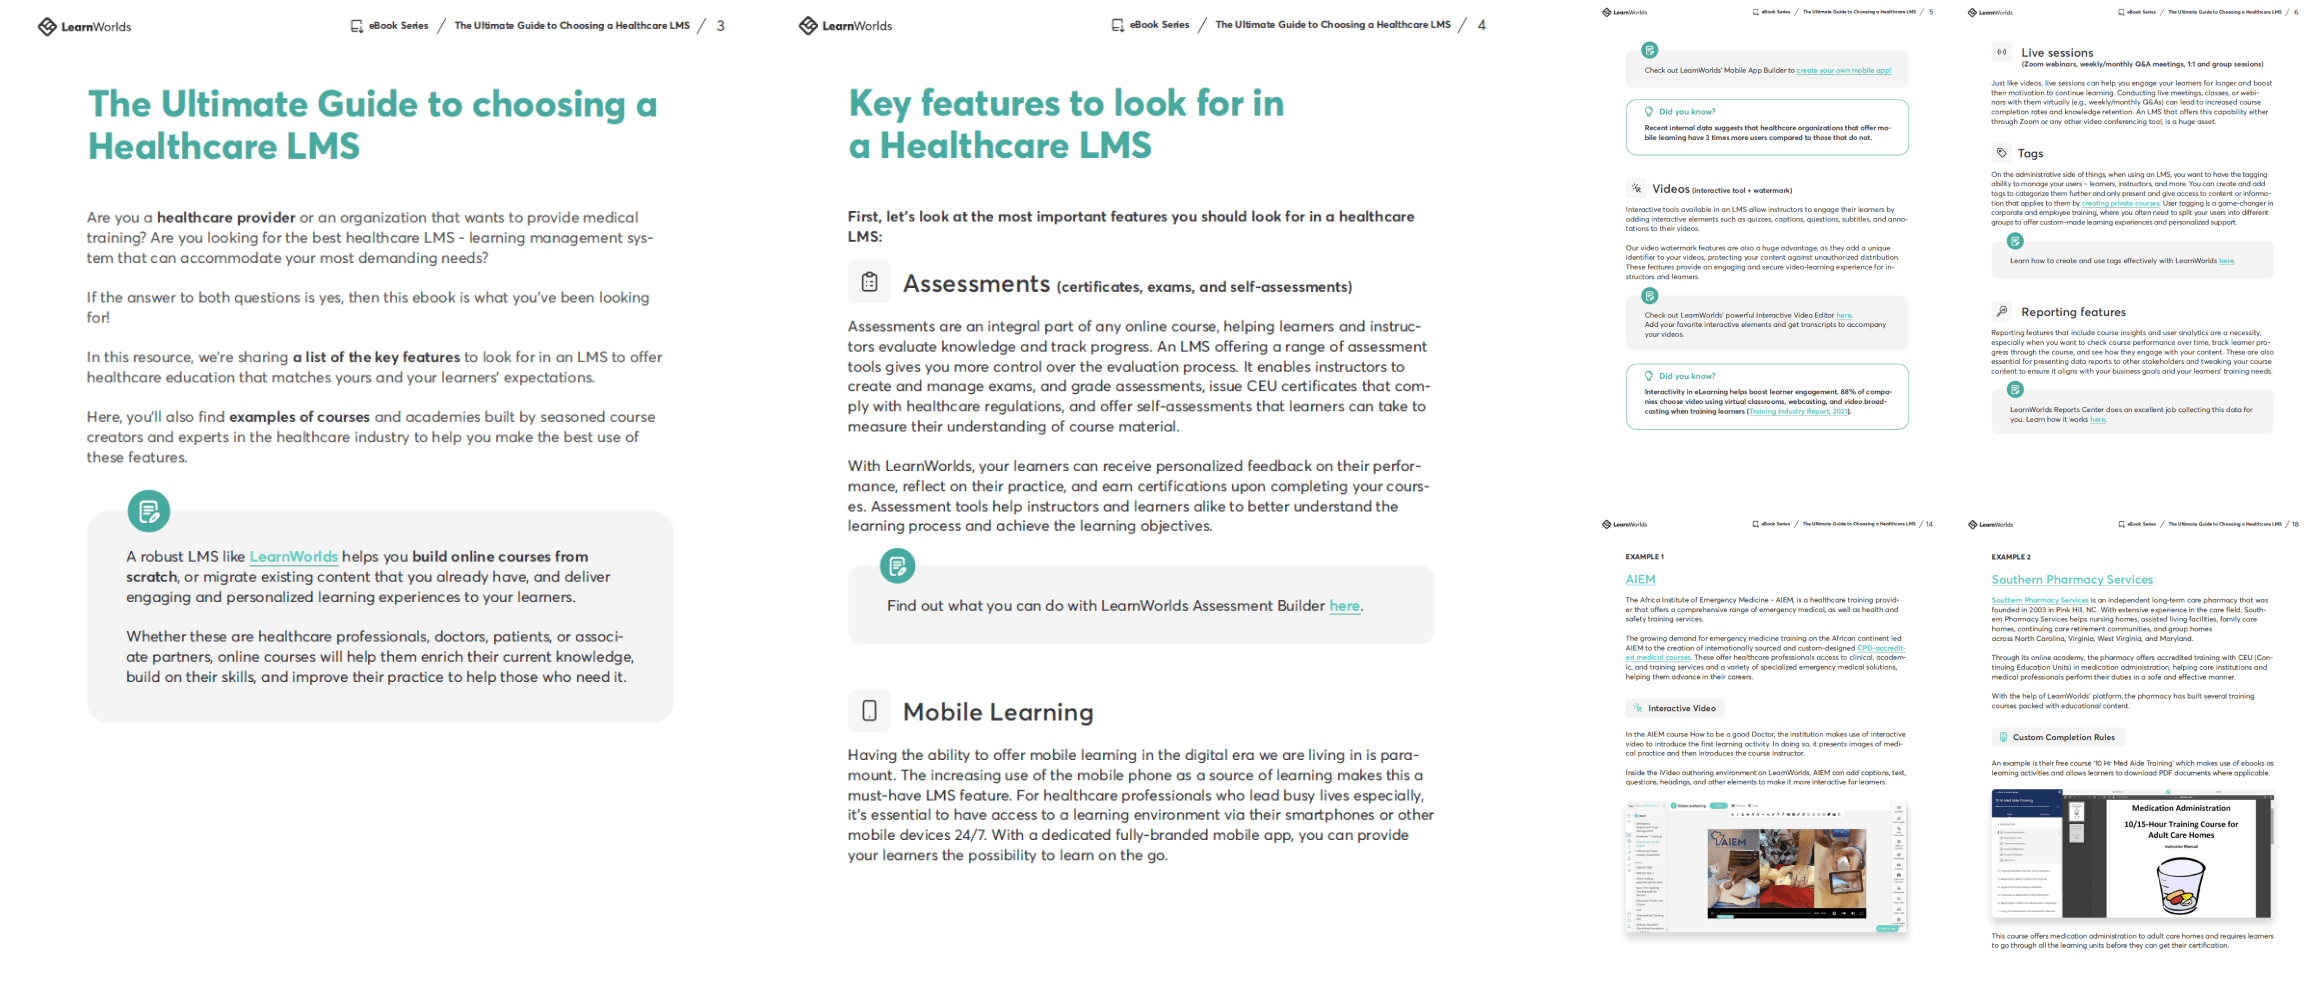 The ultimate guide to choosing a healthcare lms. Sample pages.